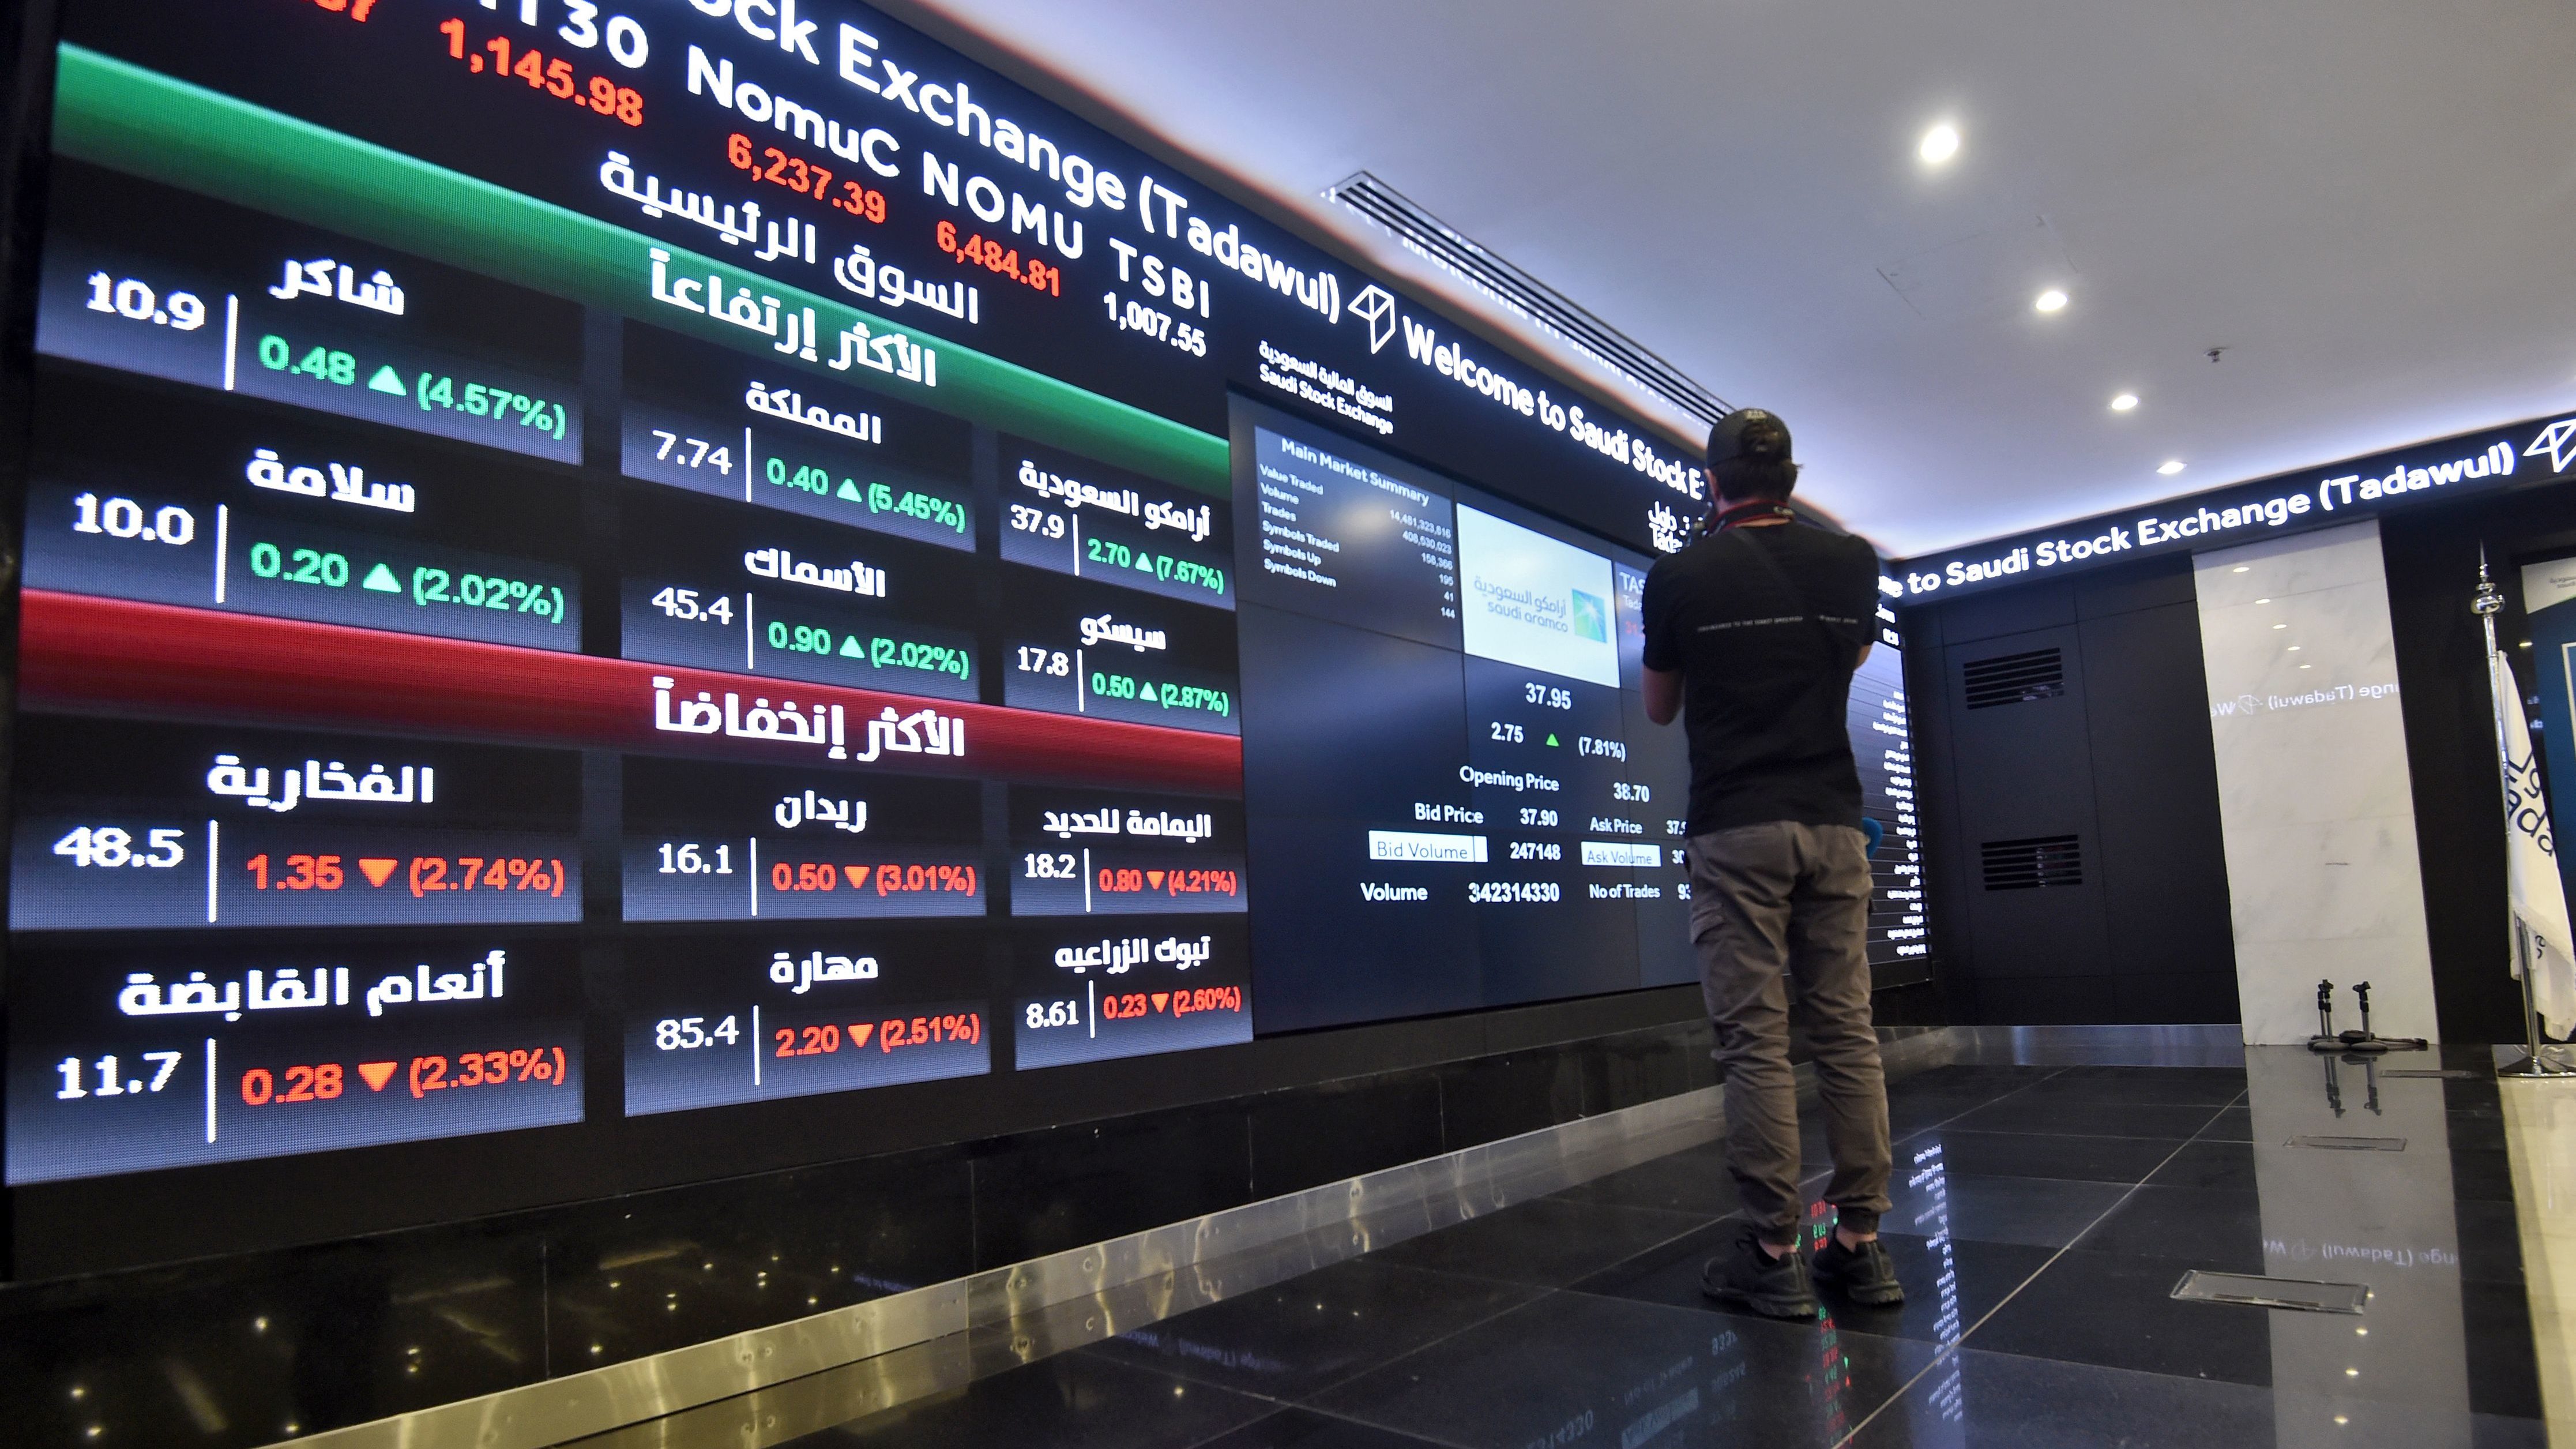 Gulf Stocks Aramco Shares Plunge Oil Prices Rise Amid Us Iran